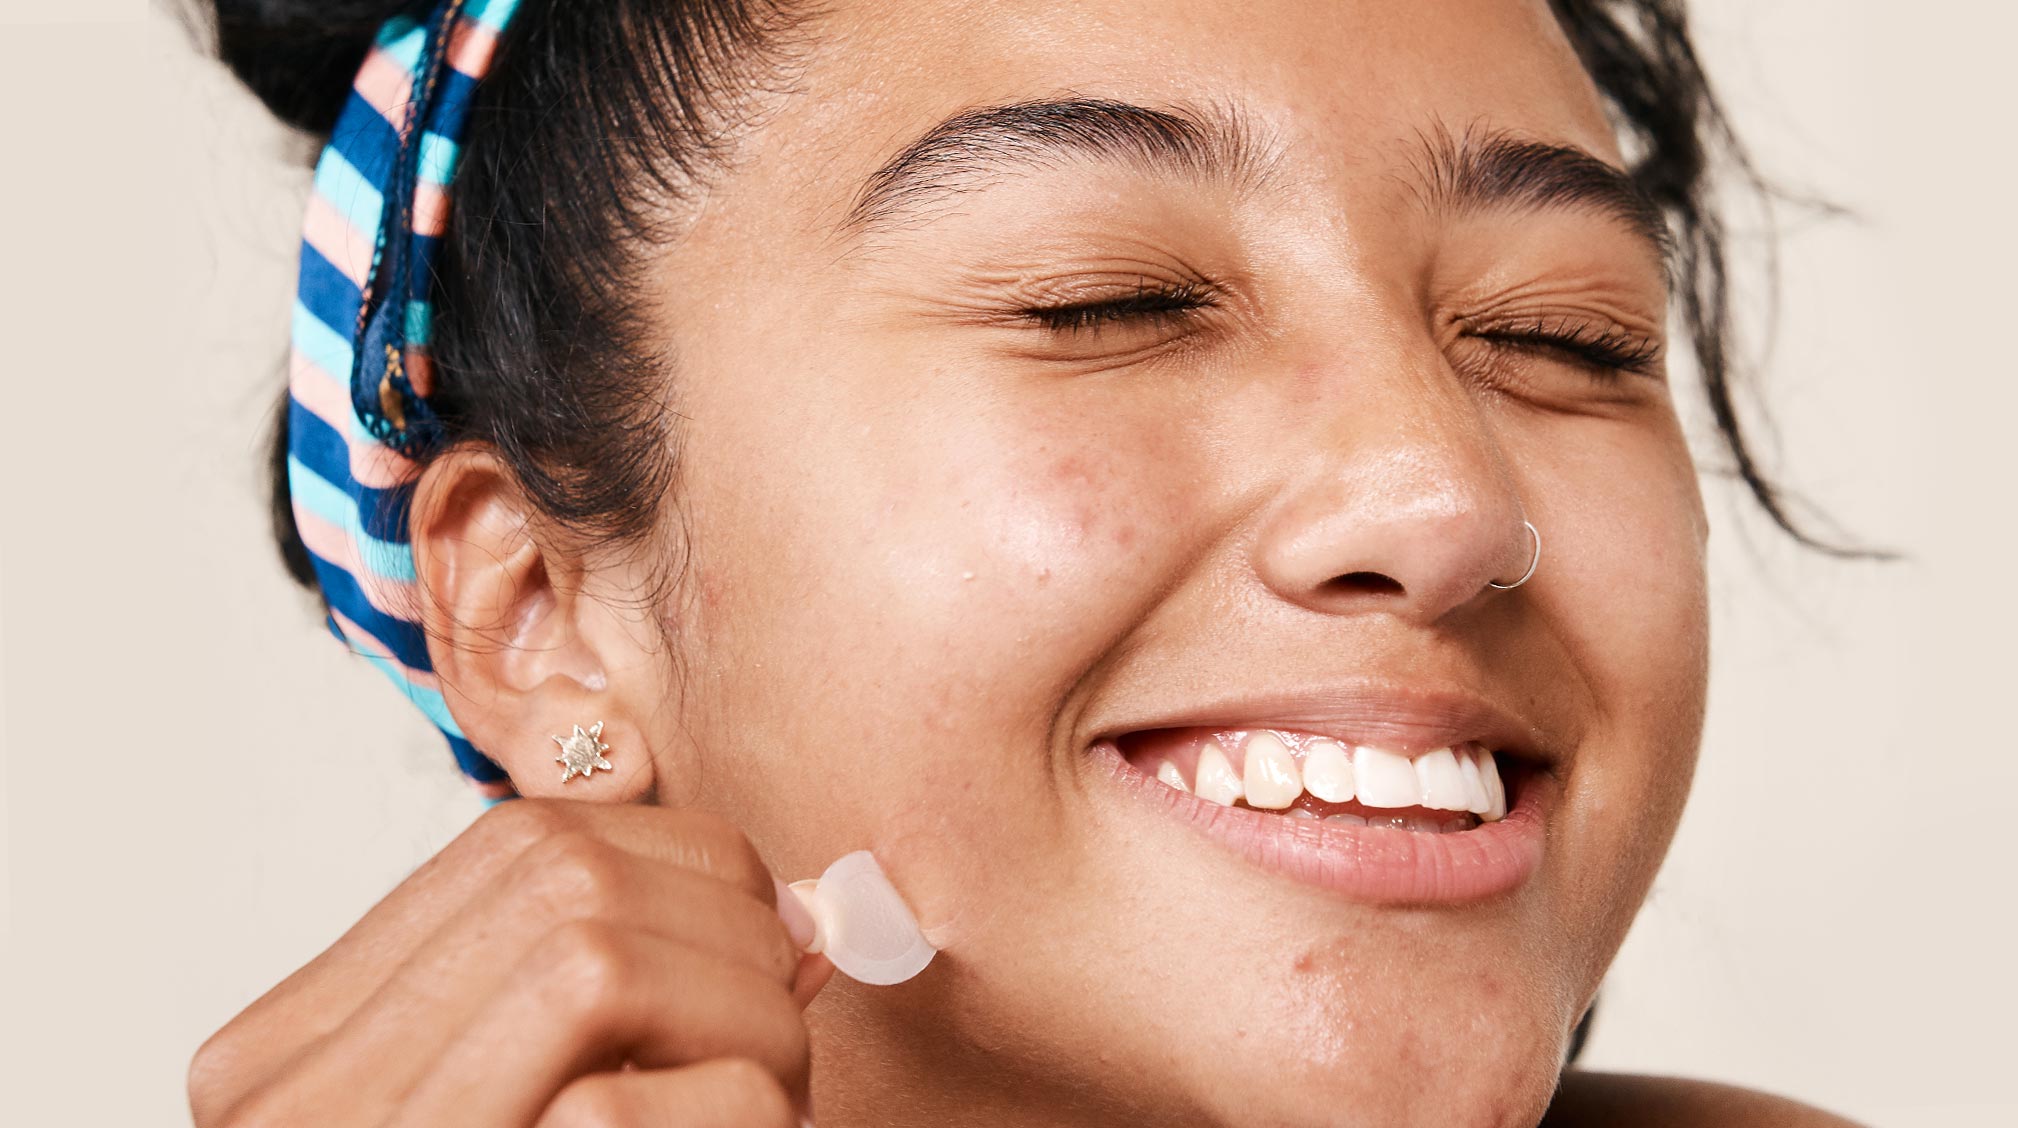 Here’s How to Take Your Skincare Routine to the Next Level